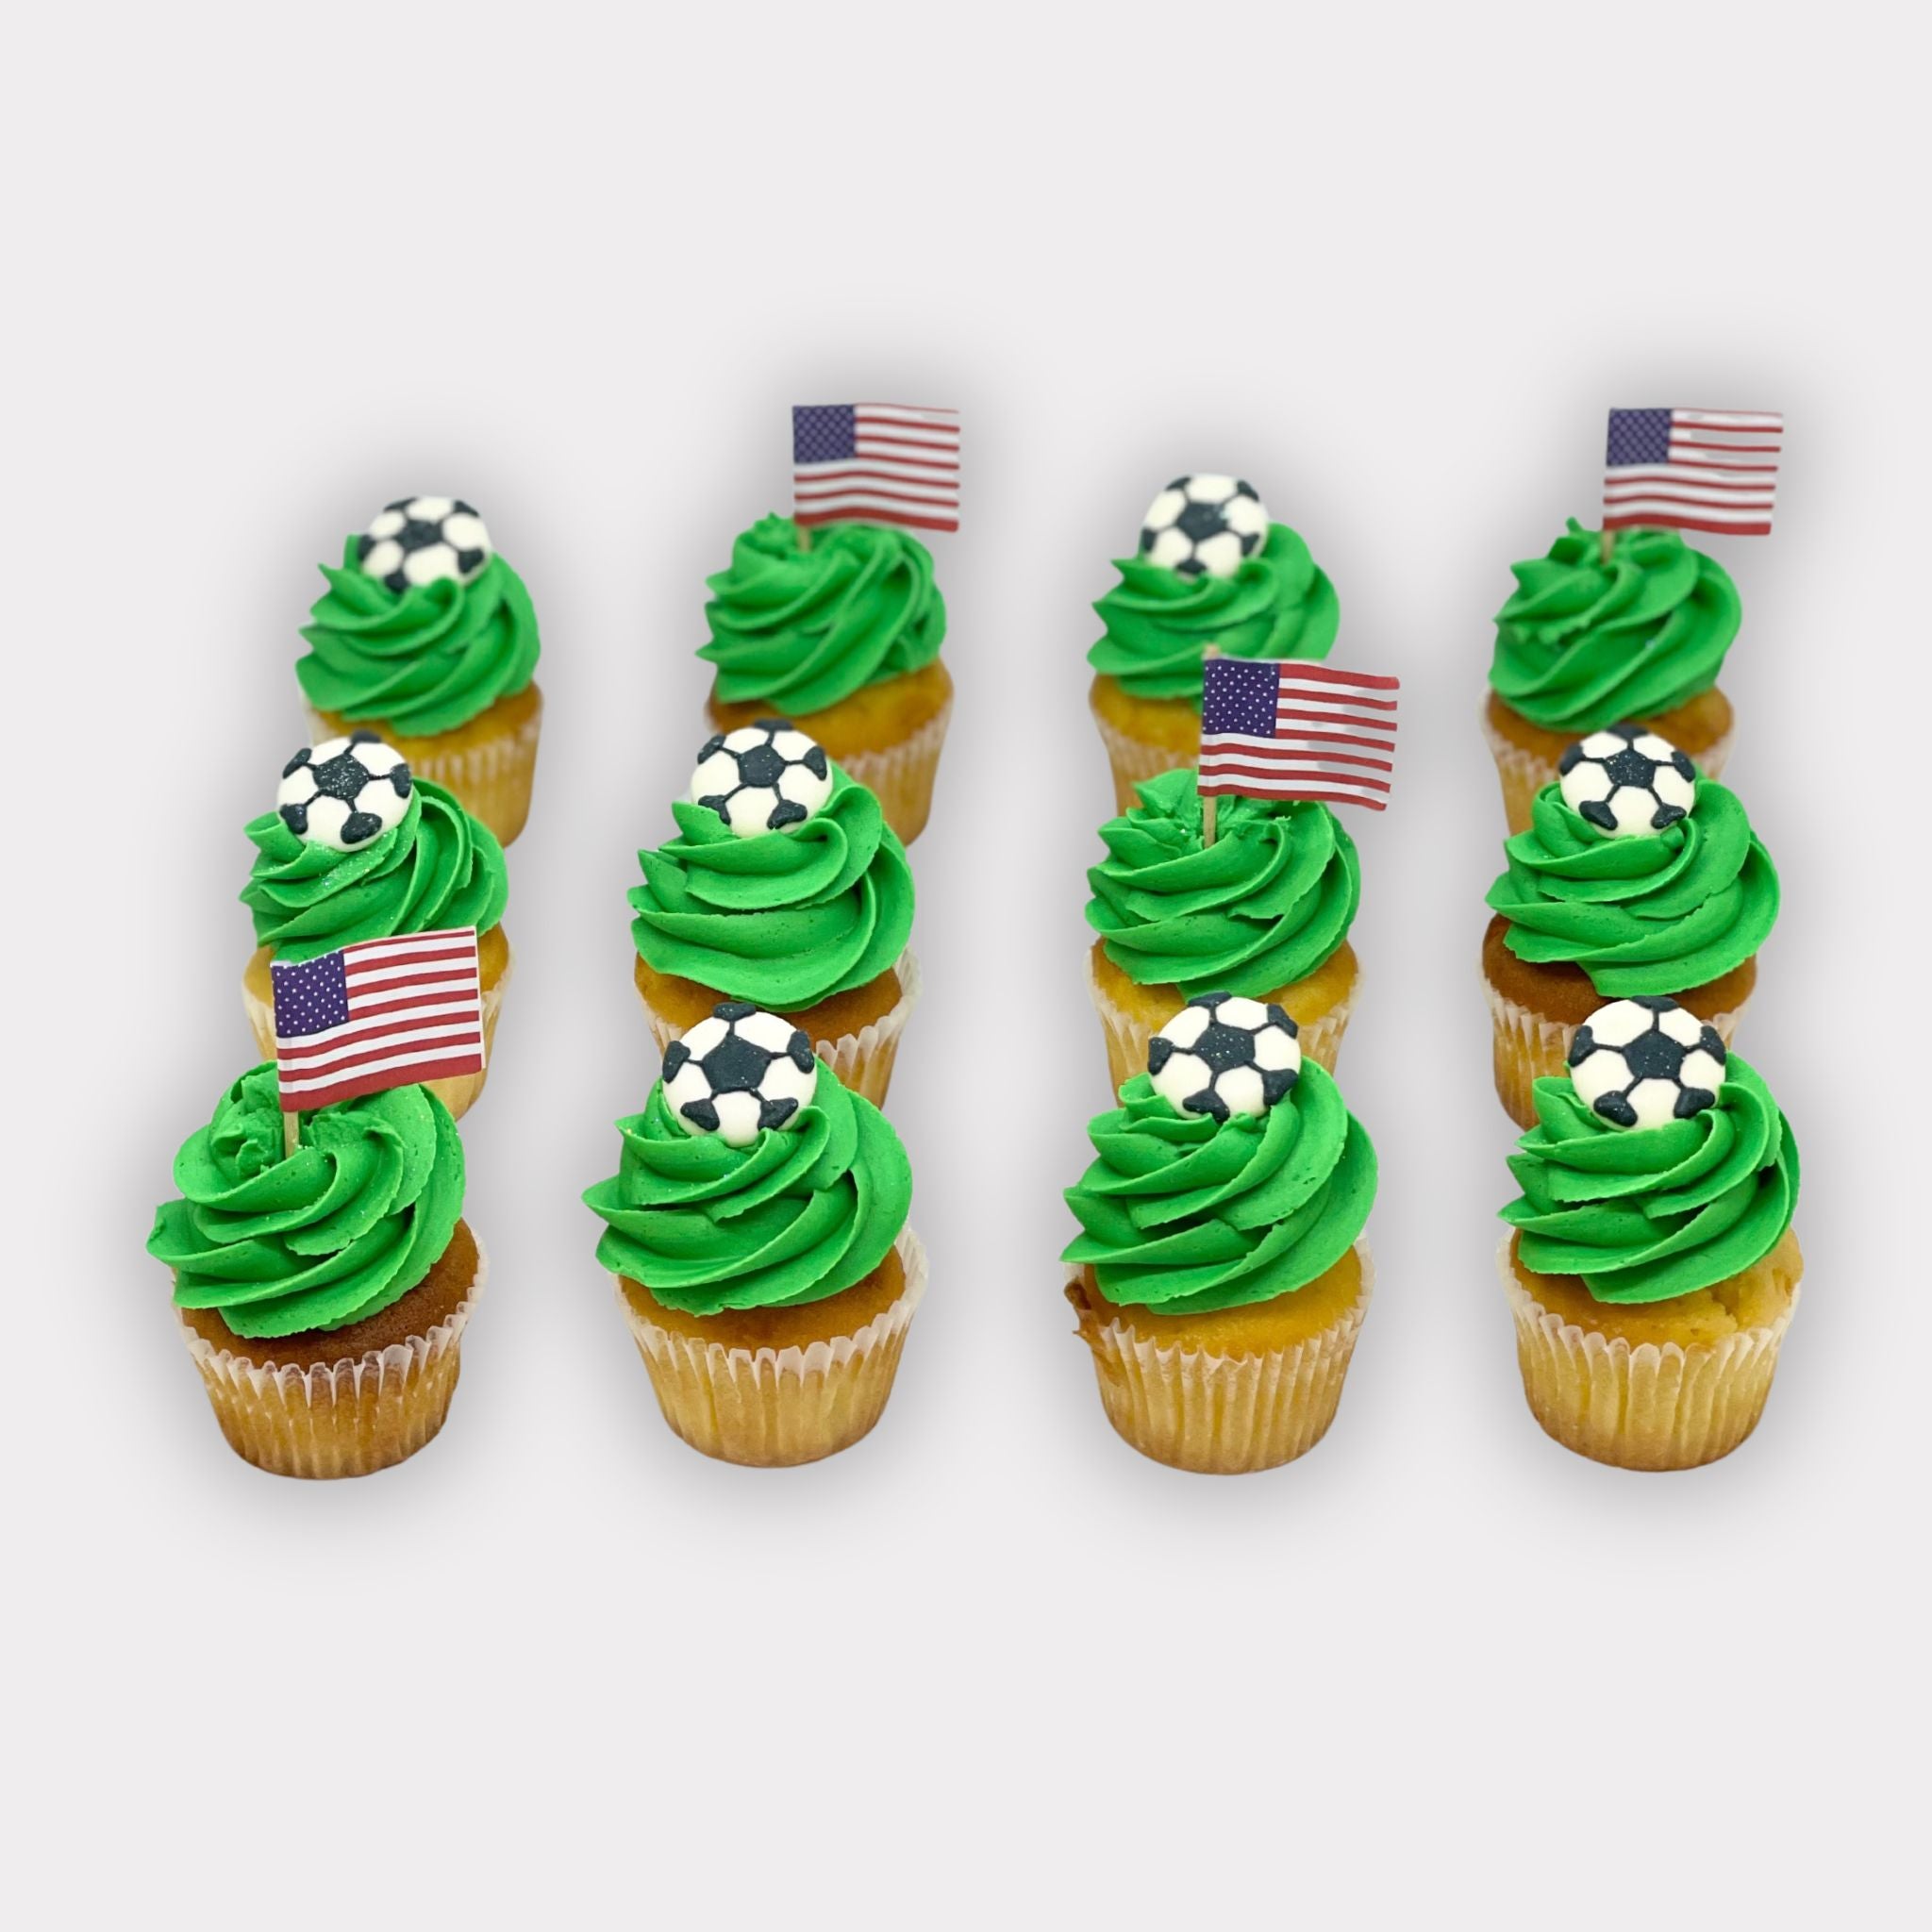 FIFA Women's World Cup Cupcakes